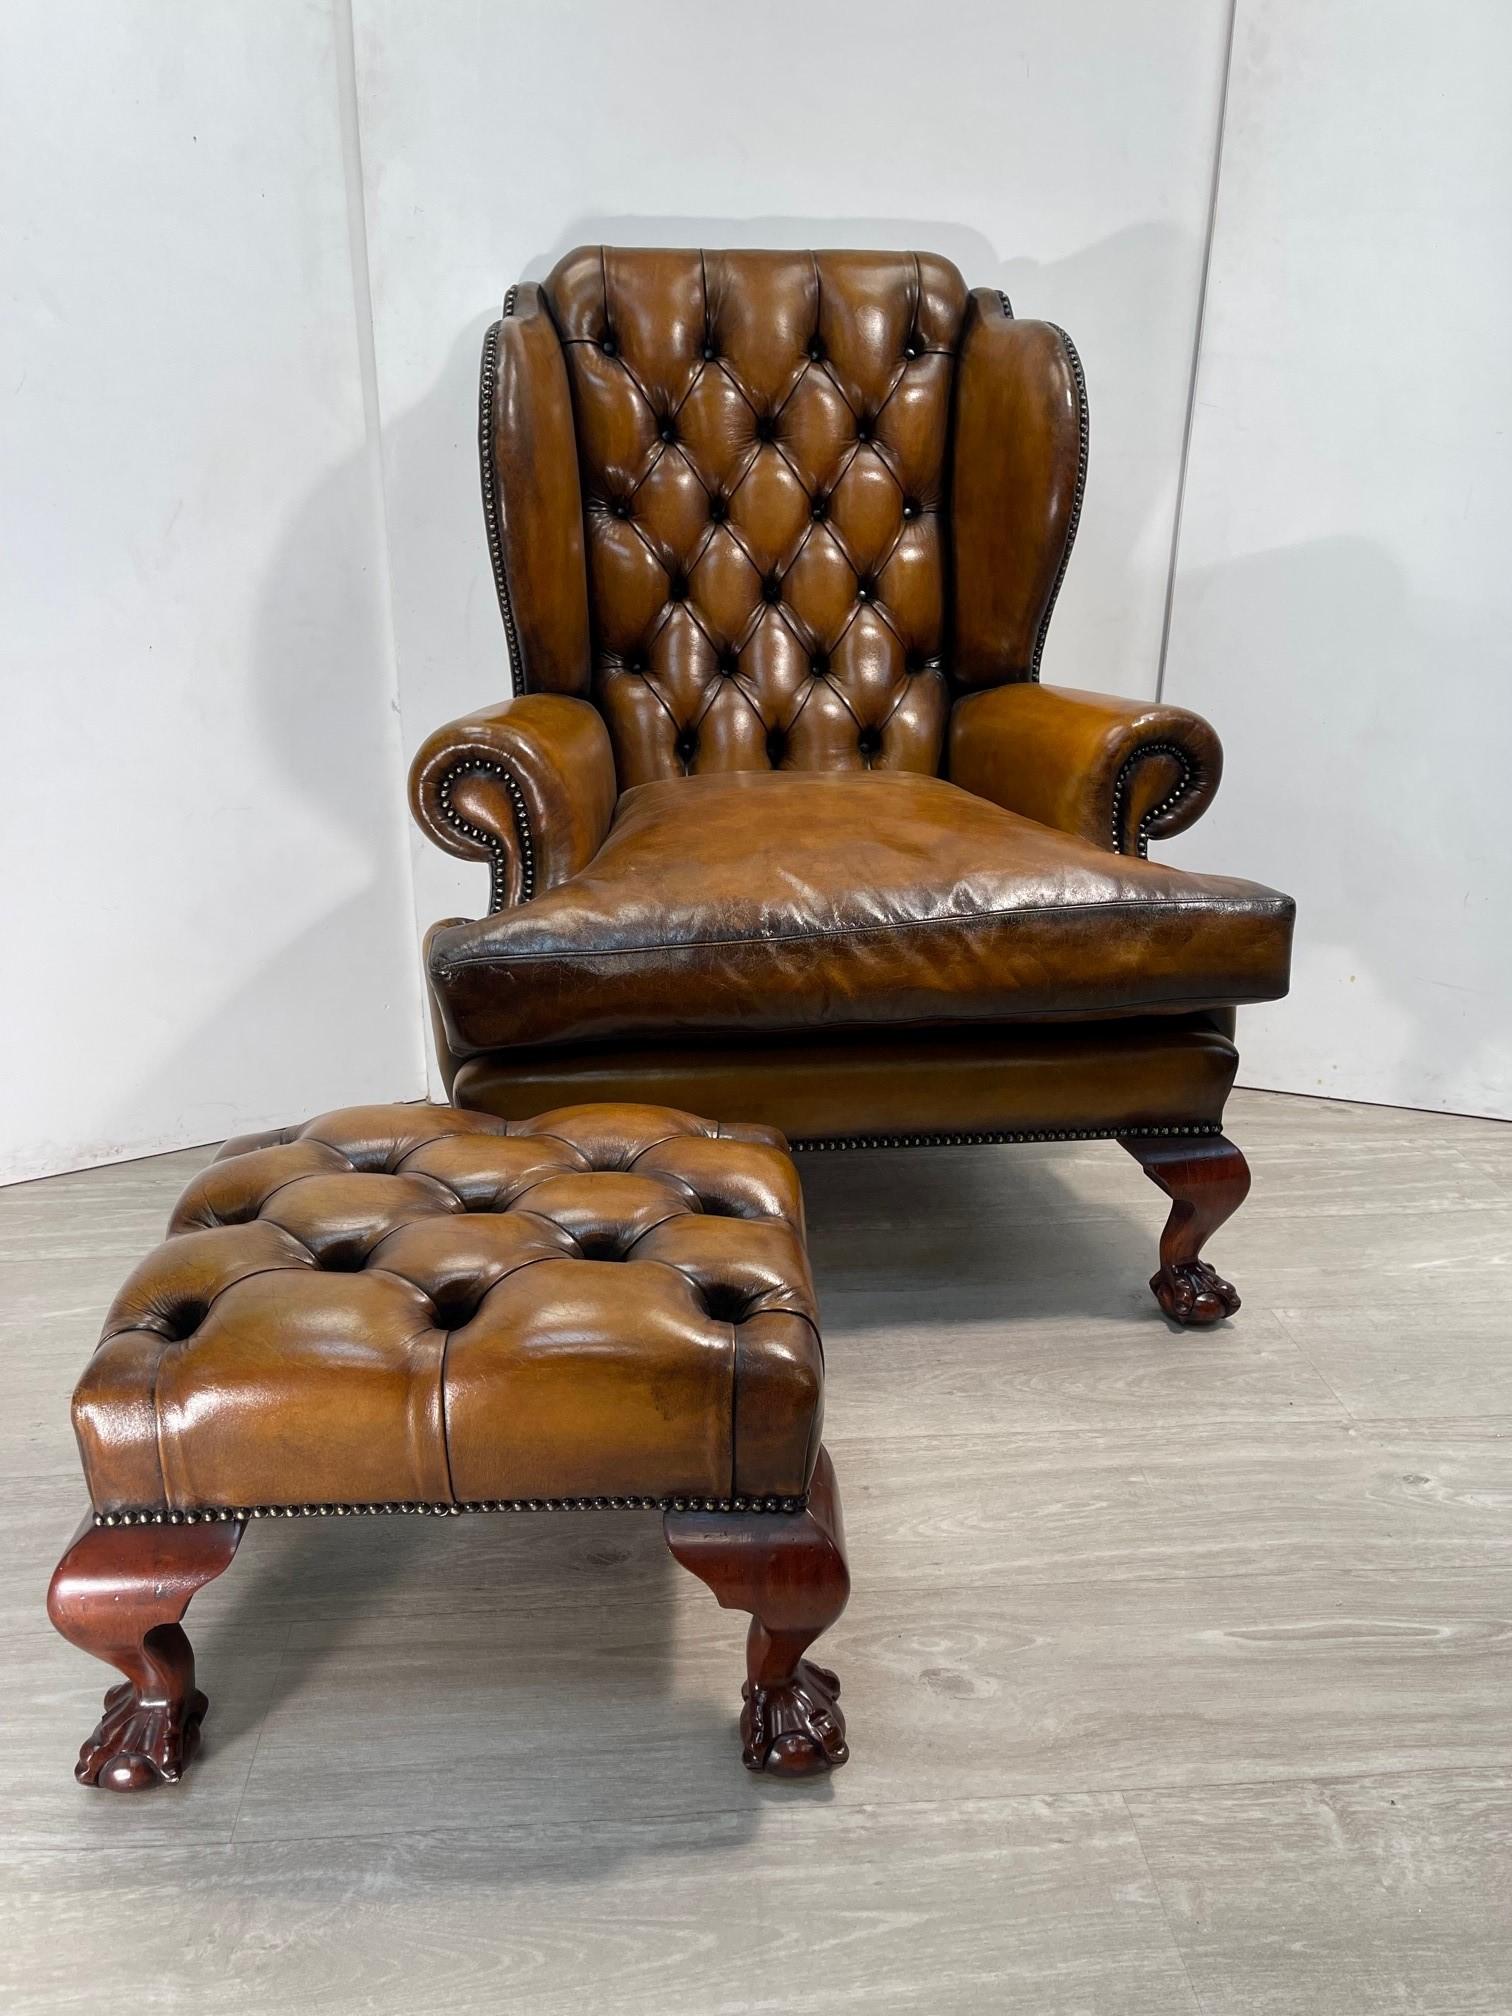 We are delighted to offer for sale this Sublime vintage, fully restored, Brown Leather Chesterfield Wingback armchair and matching footstool with over sized hand carved Claw & Ball feet

A very good looking well made and decorative pair, this is a